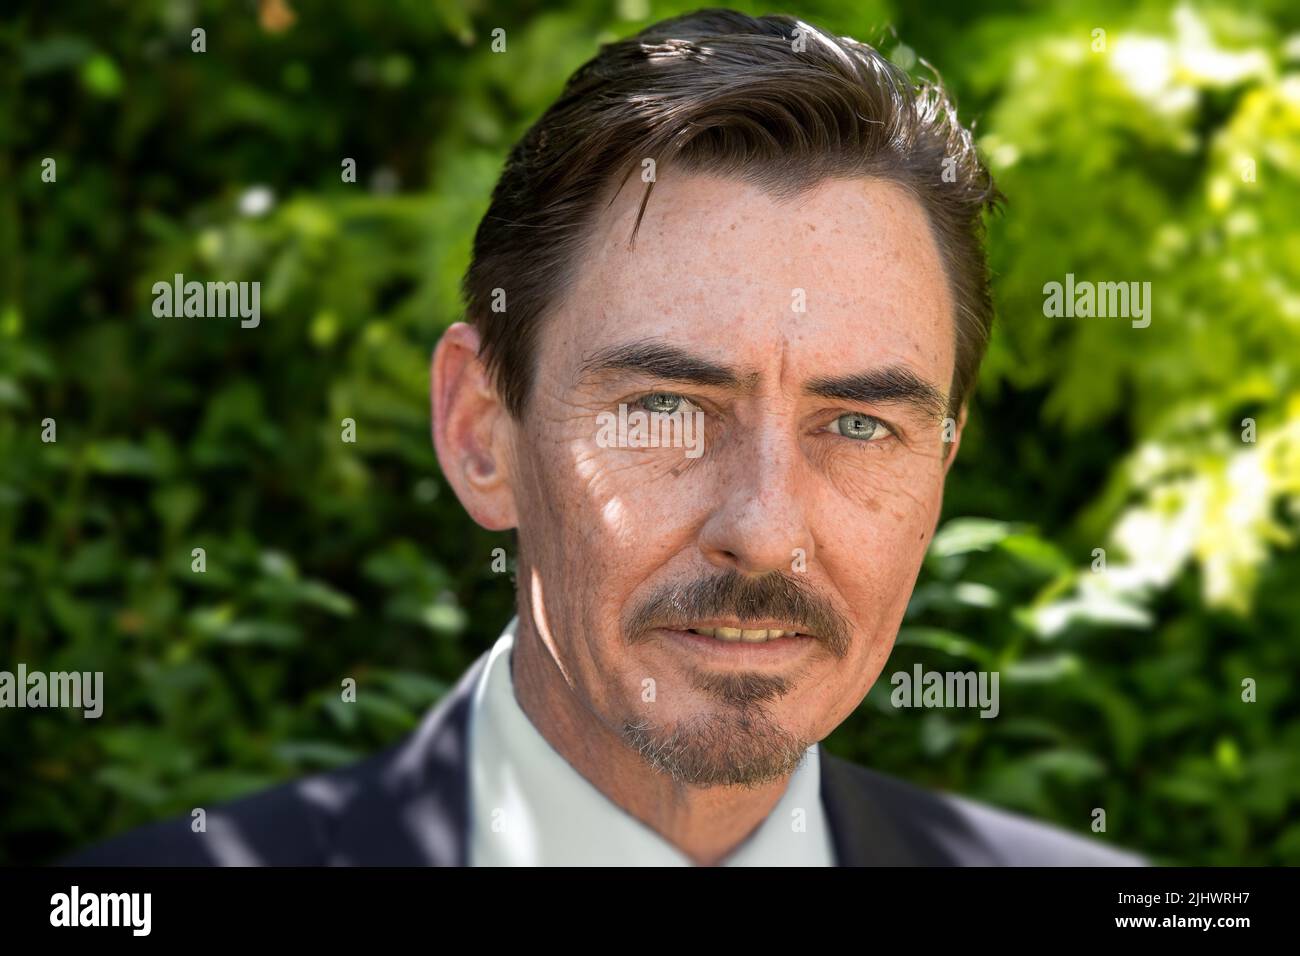 Natural light portrait of middle aged businessman with intense green eyes Stock Photo